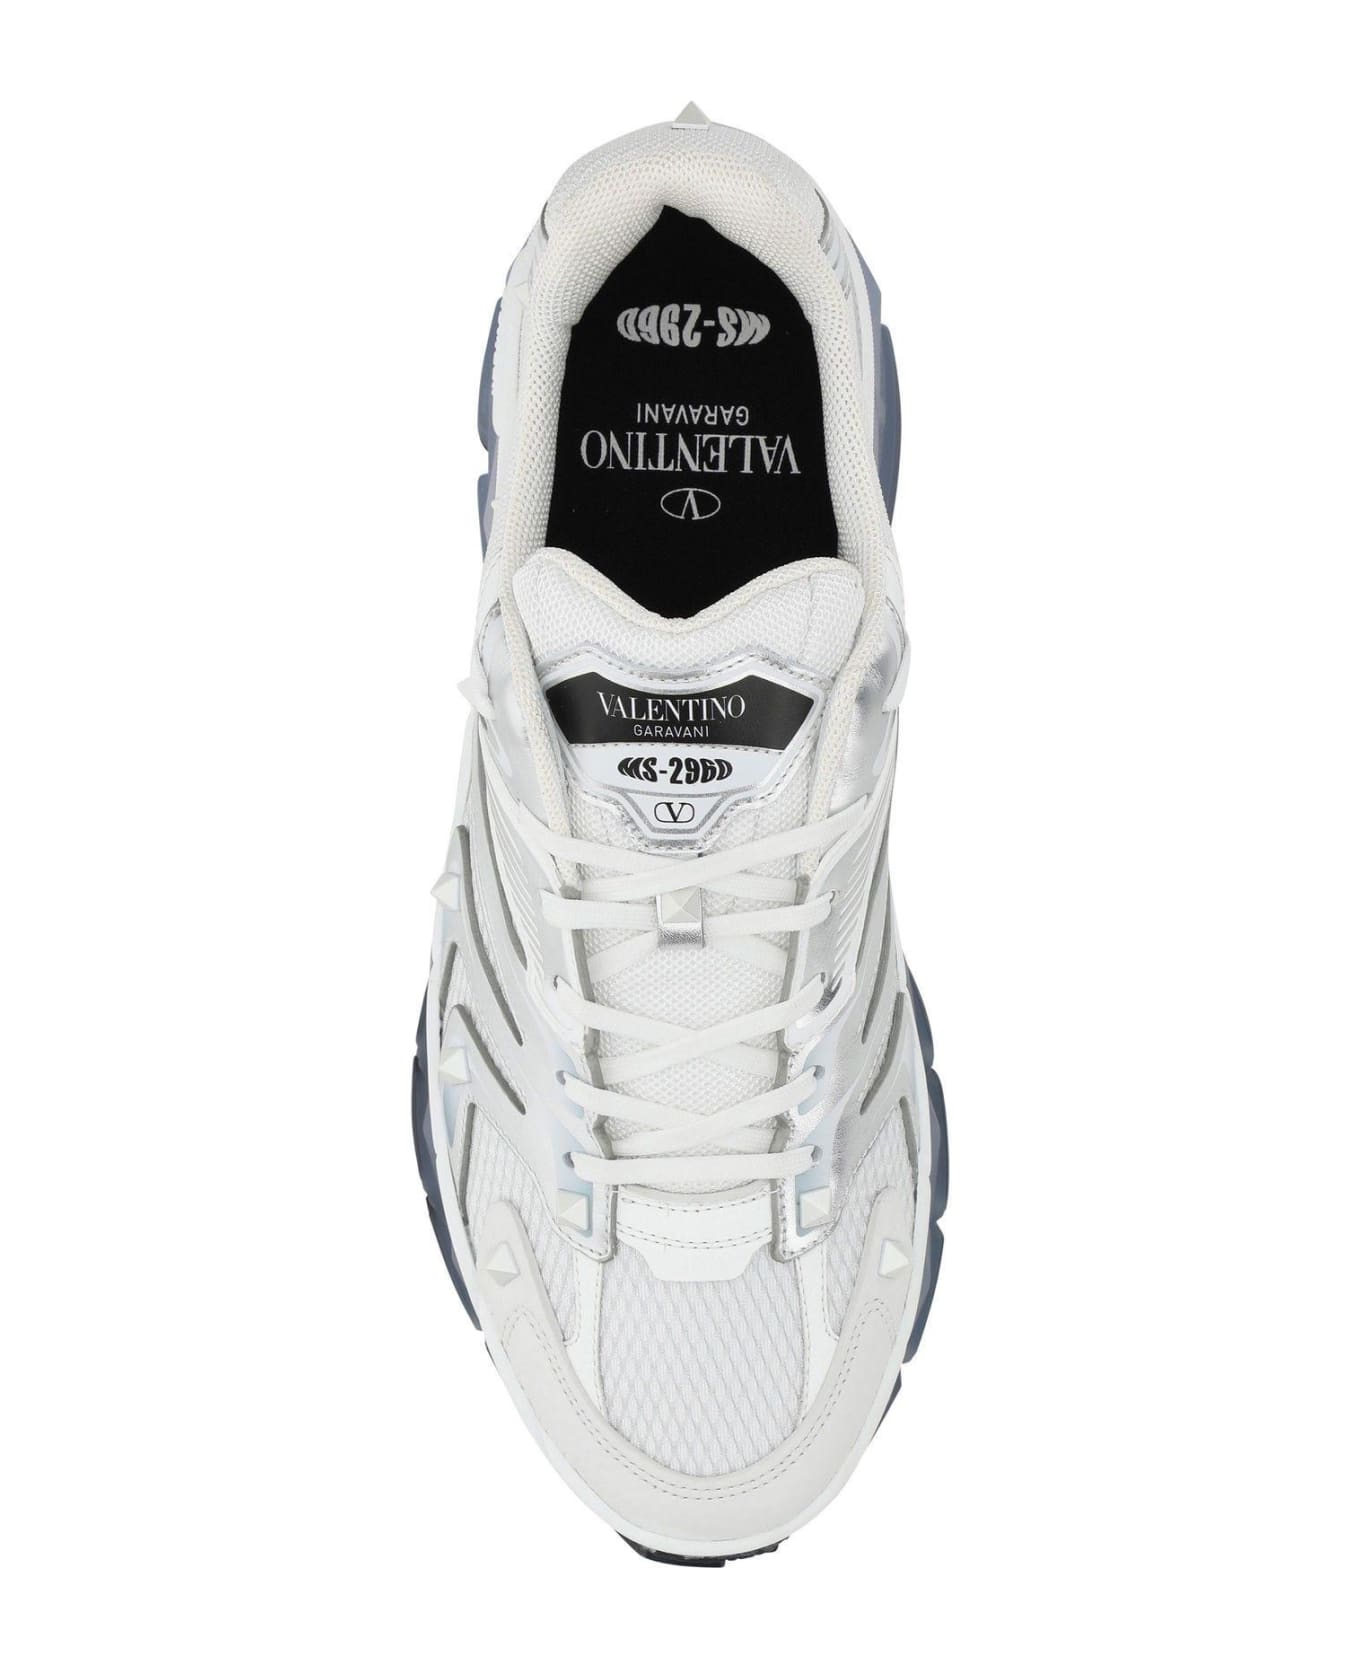 Valentino Garavani Two-tone Leather And Fabric Low-top Ms-2960 Sneakers - Bianco